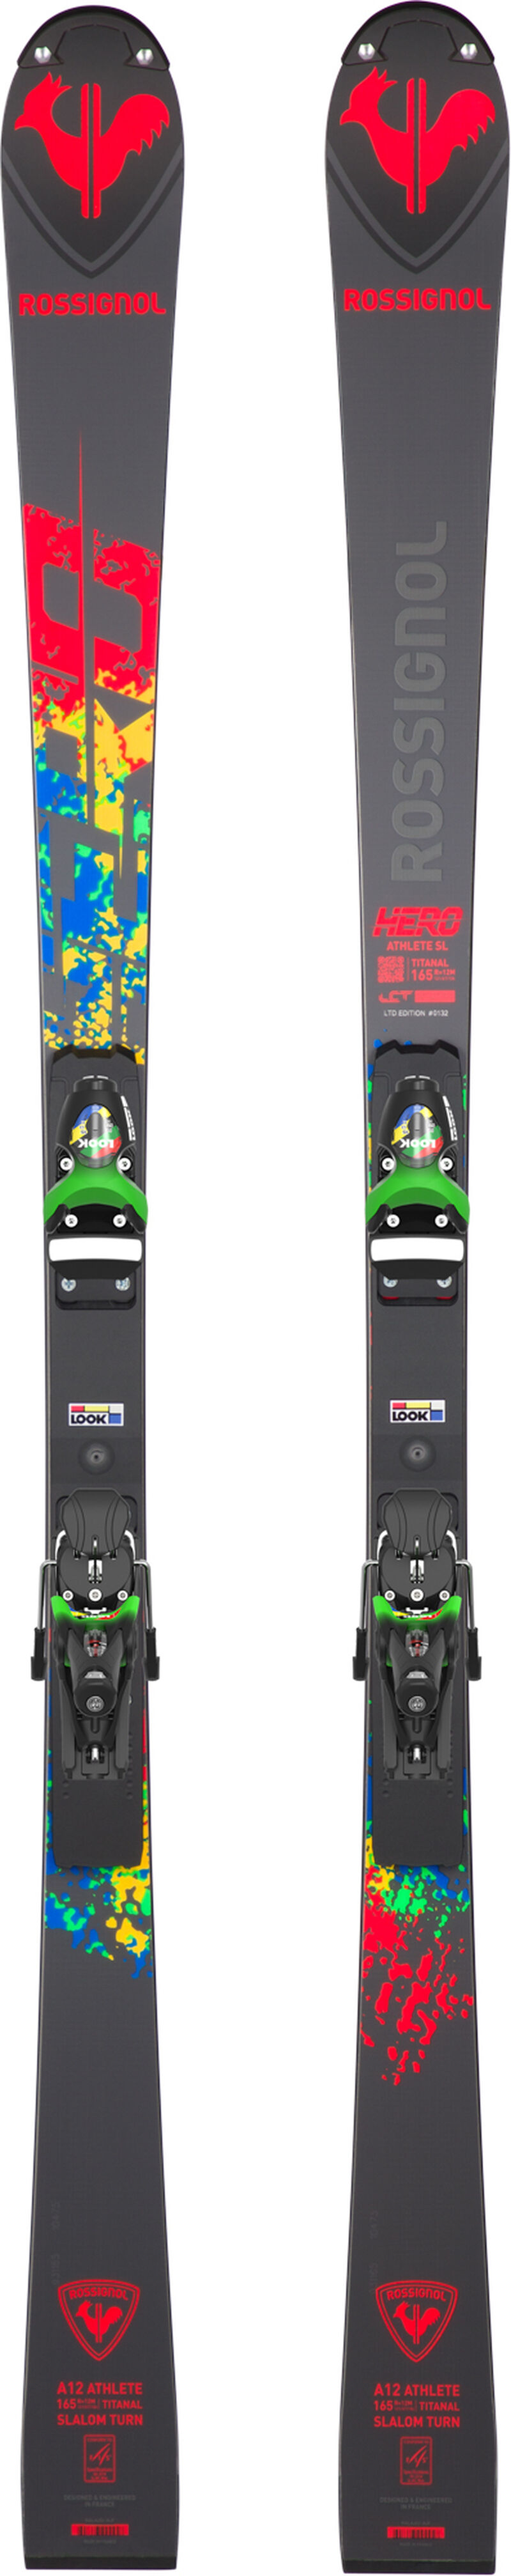 Skis racing unisexe HERO ATHLETE FIS SL FACTORY 165 LIMITED EDITION R22